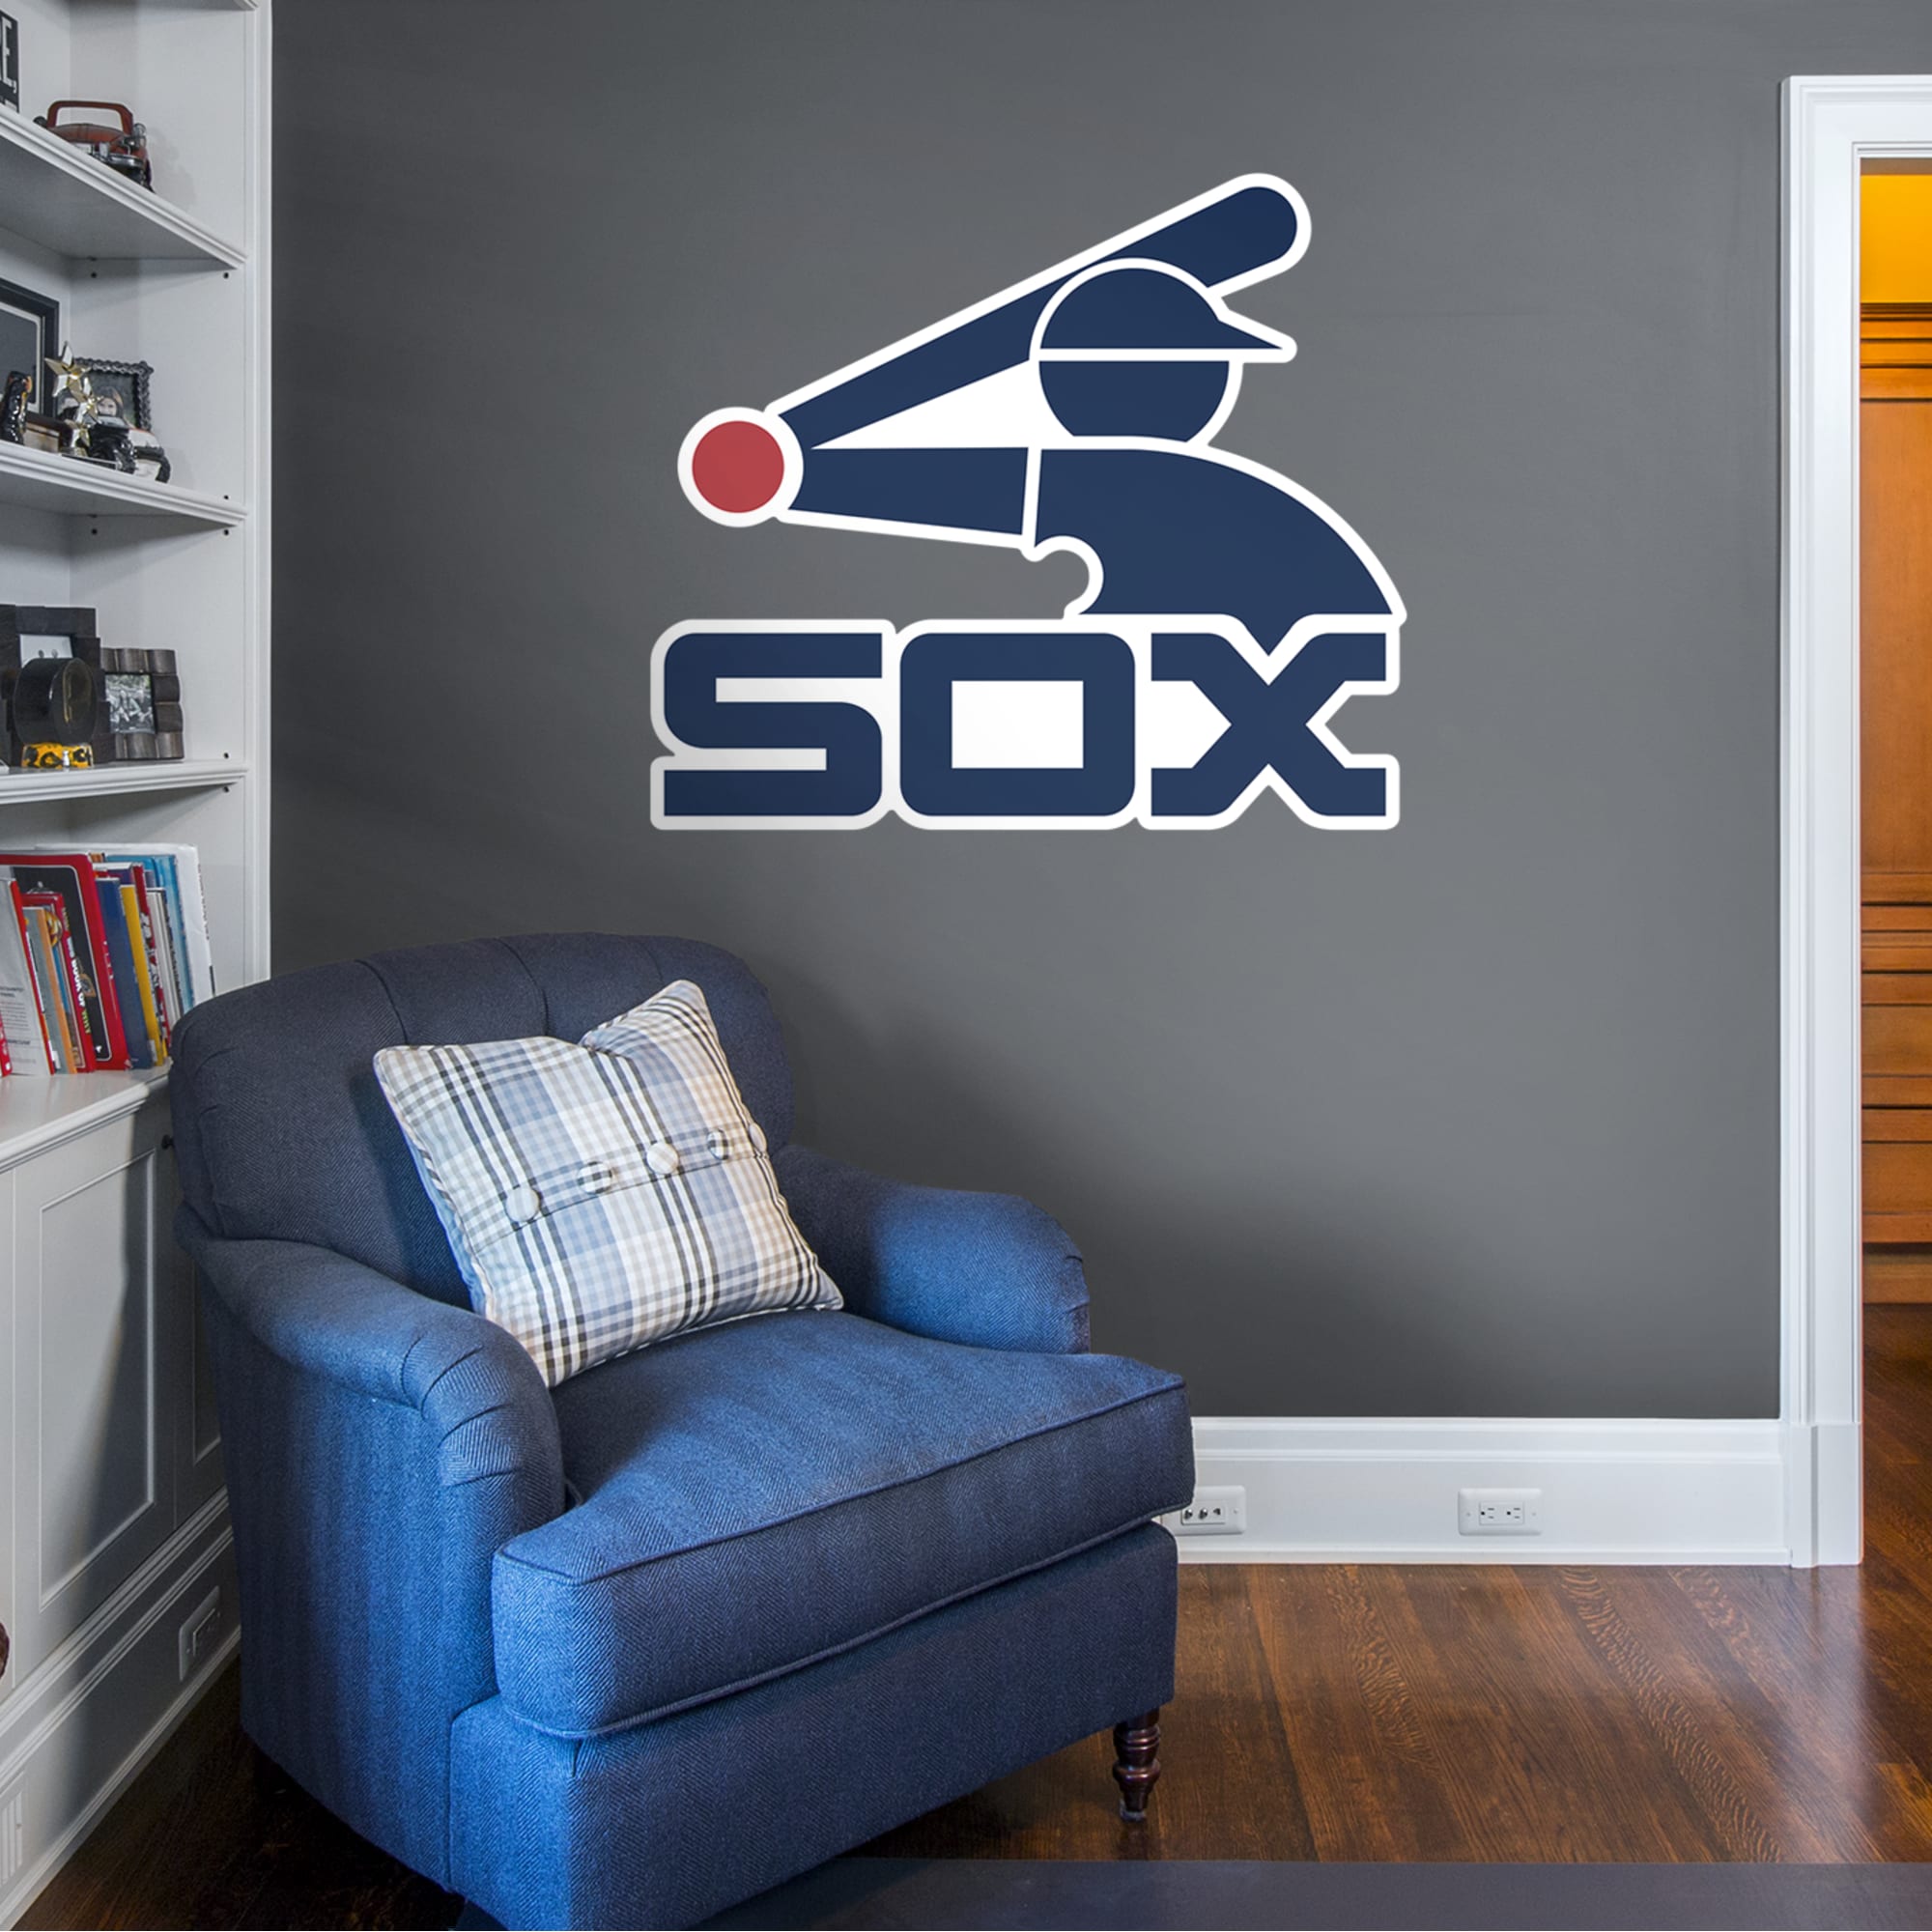 Chicago White Sox: Classic Logo - Officially Licensed MLB Removable Wall Decal Giant Logo (44"W x 39"H) by Fathead | Vinyl